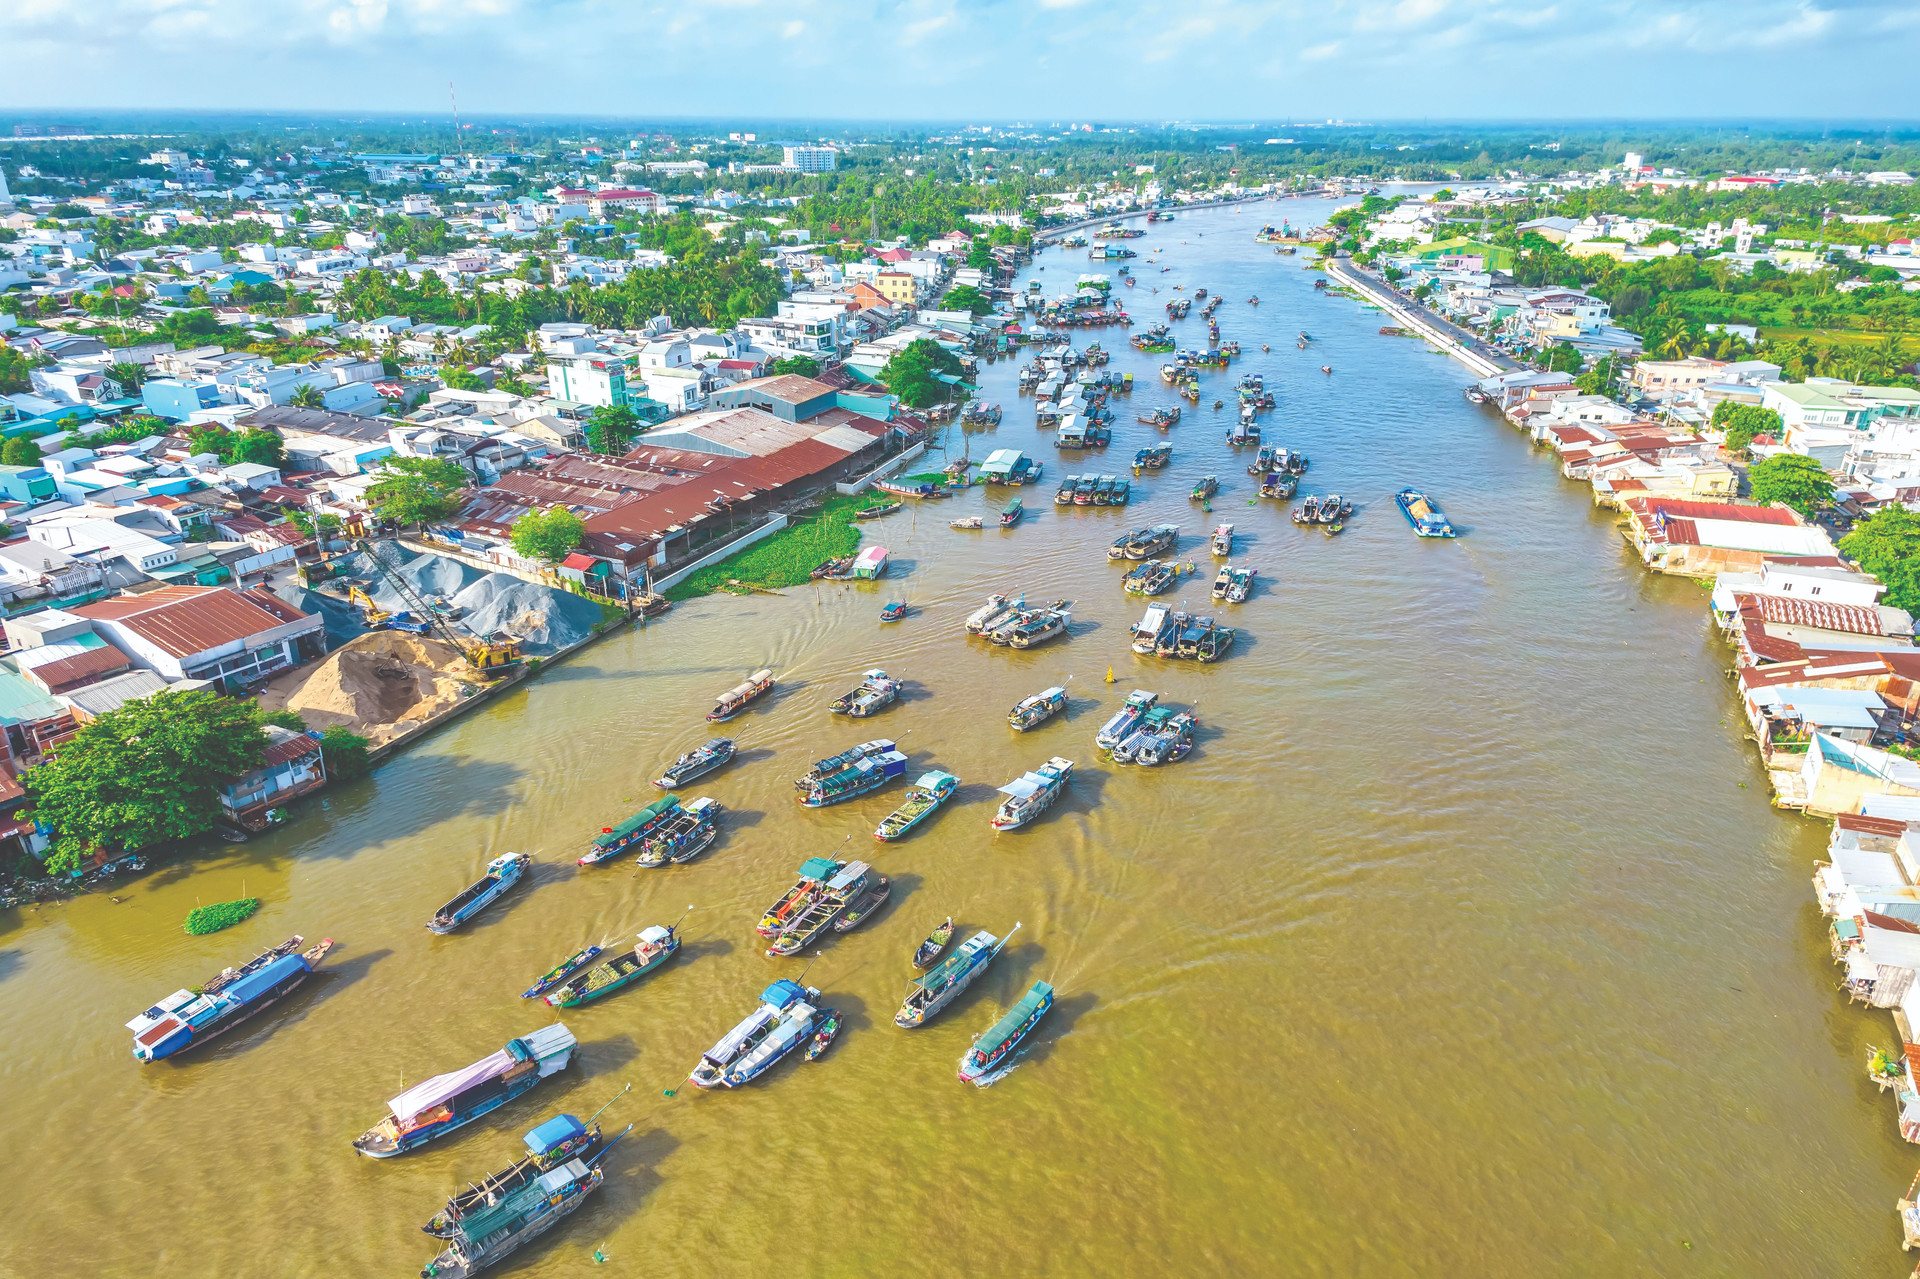 cai-rang-floating-market-can-tho-vietnam-aerial-view-cai-rang-is-famous-market-mekong-delta-compressed.jpeg